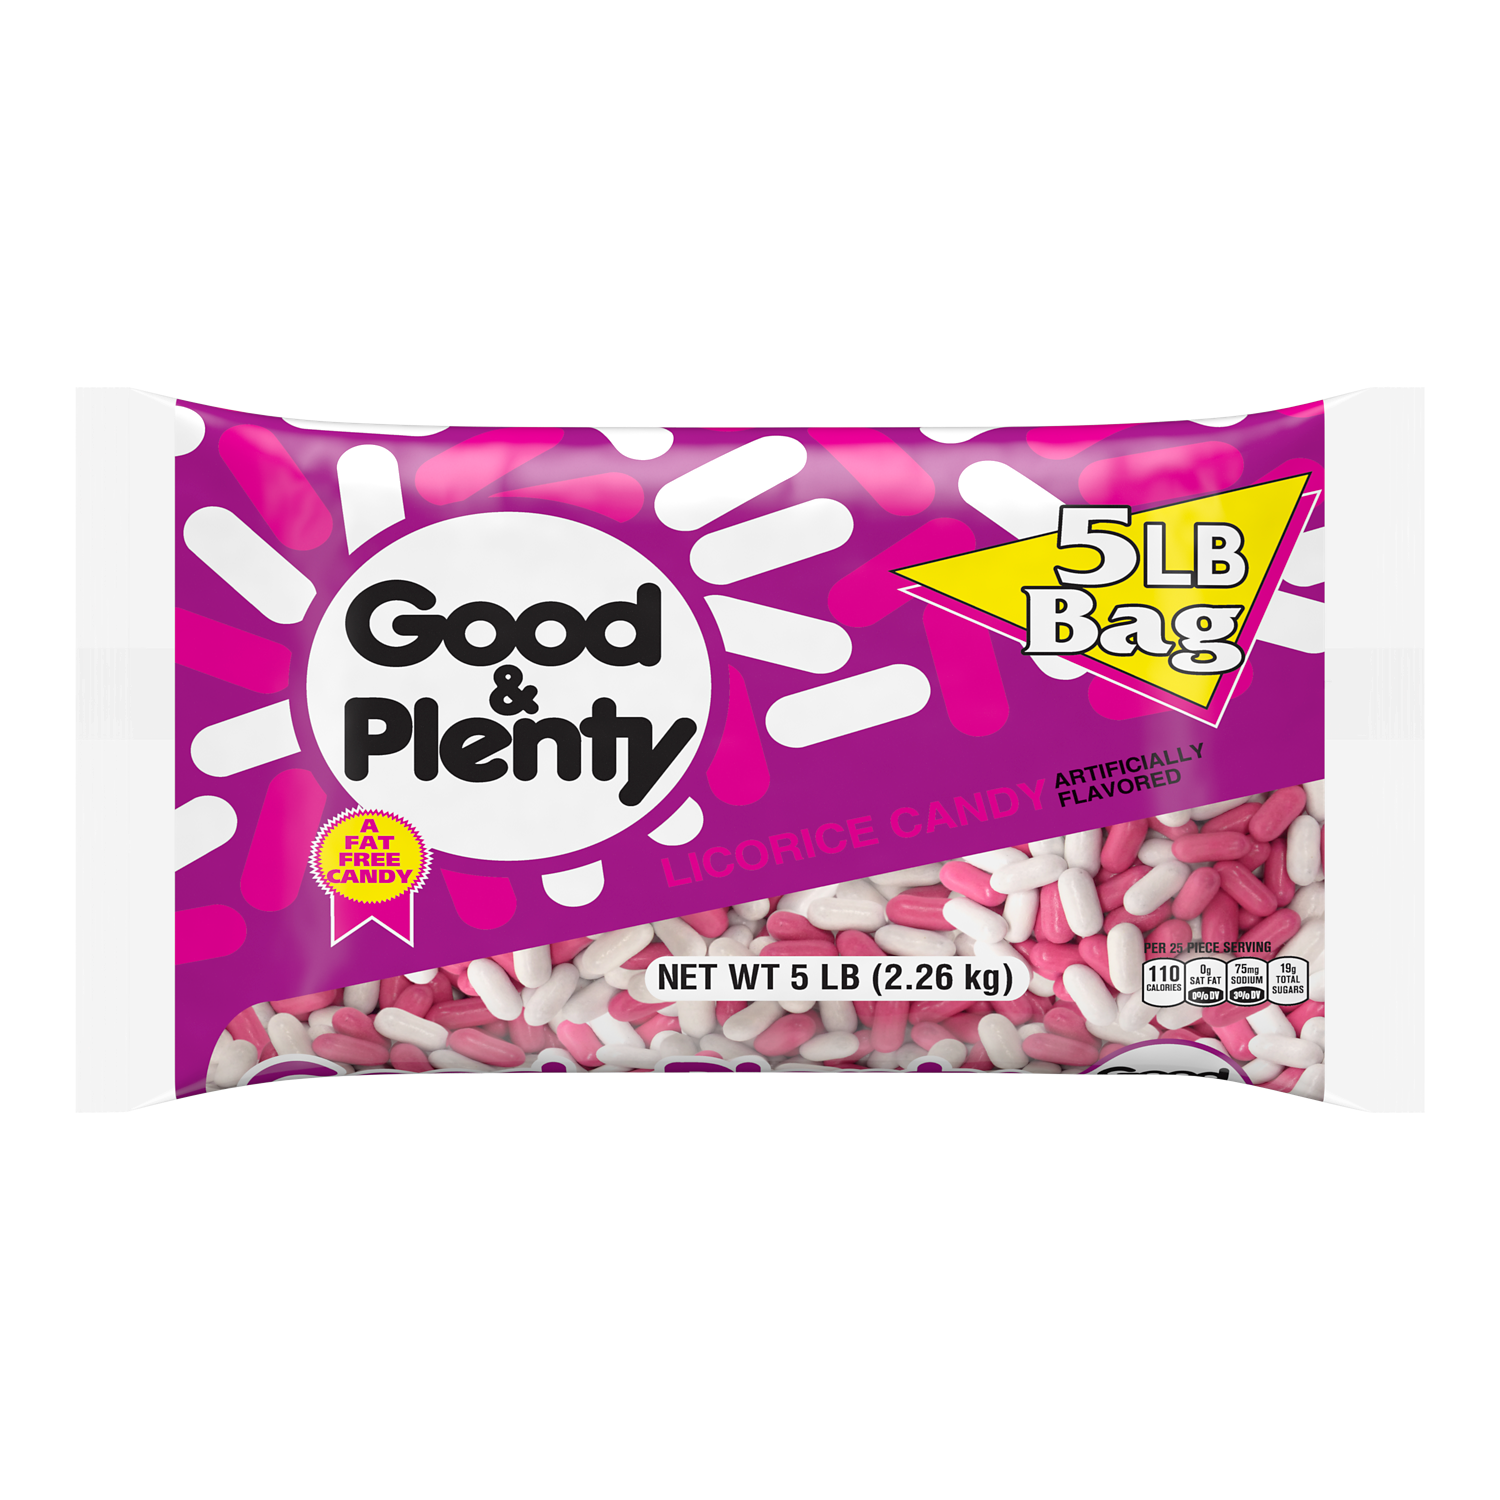 GOOD & PLENTY Licorice Candy, 80 oz bag - Front of Package